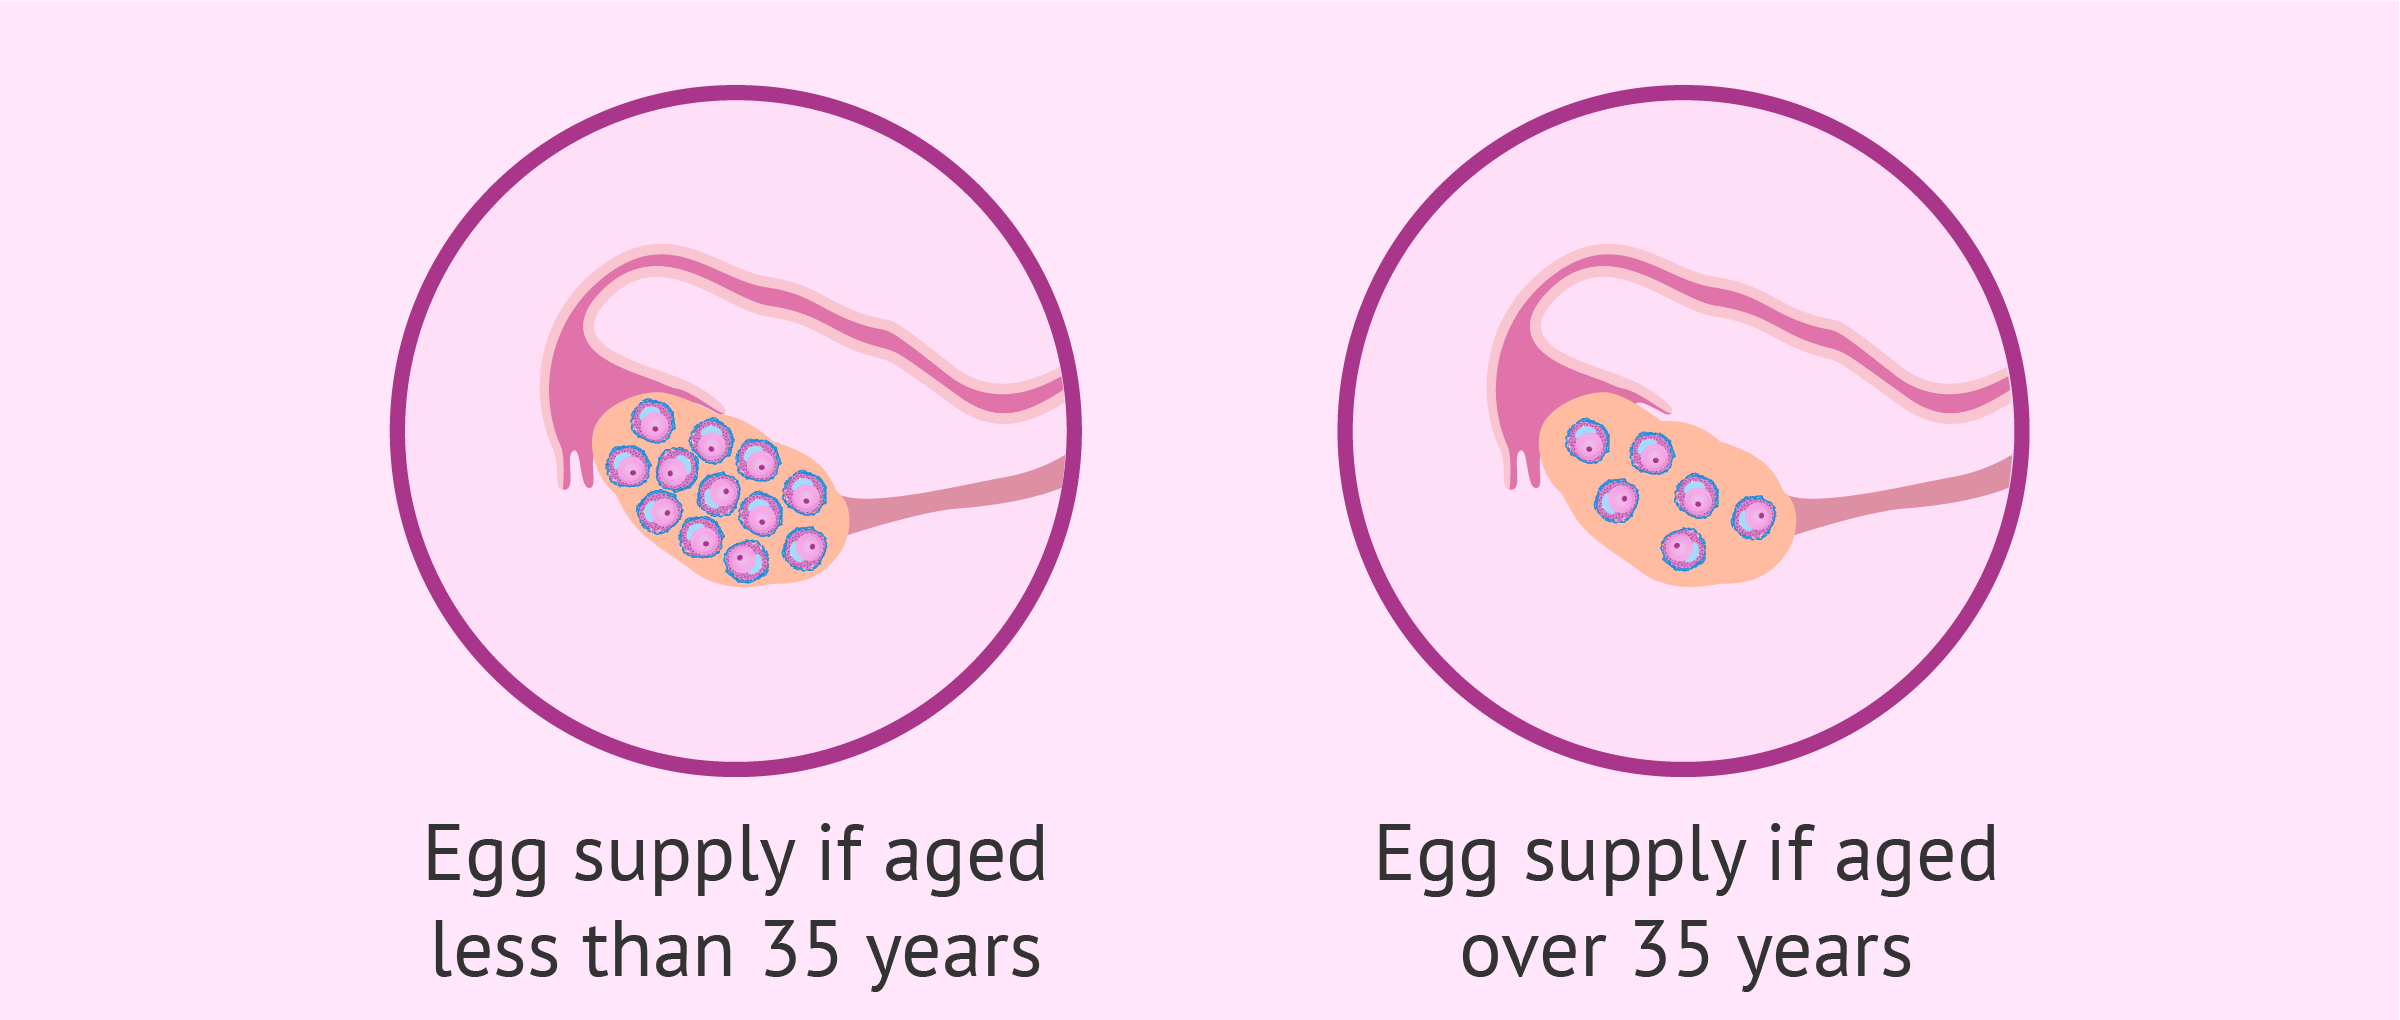 Female egg count by age